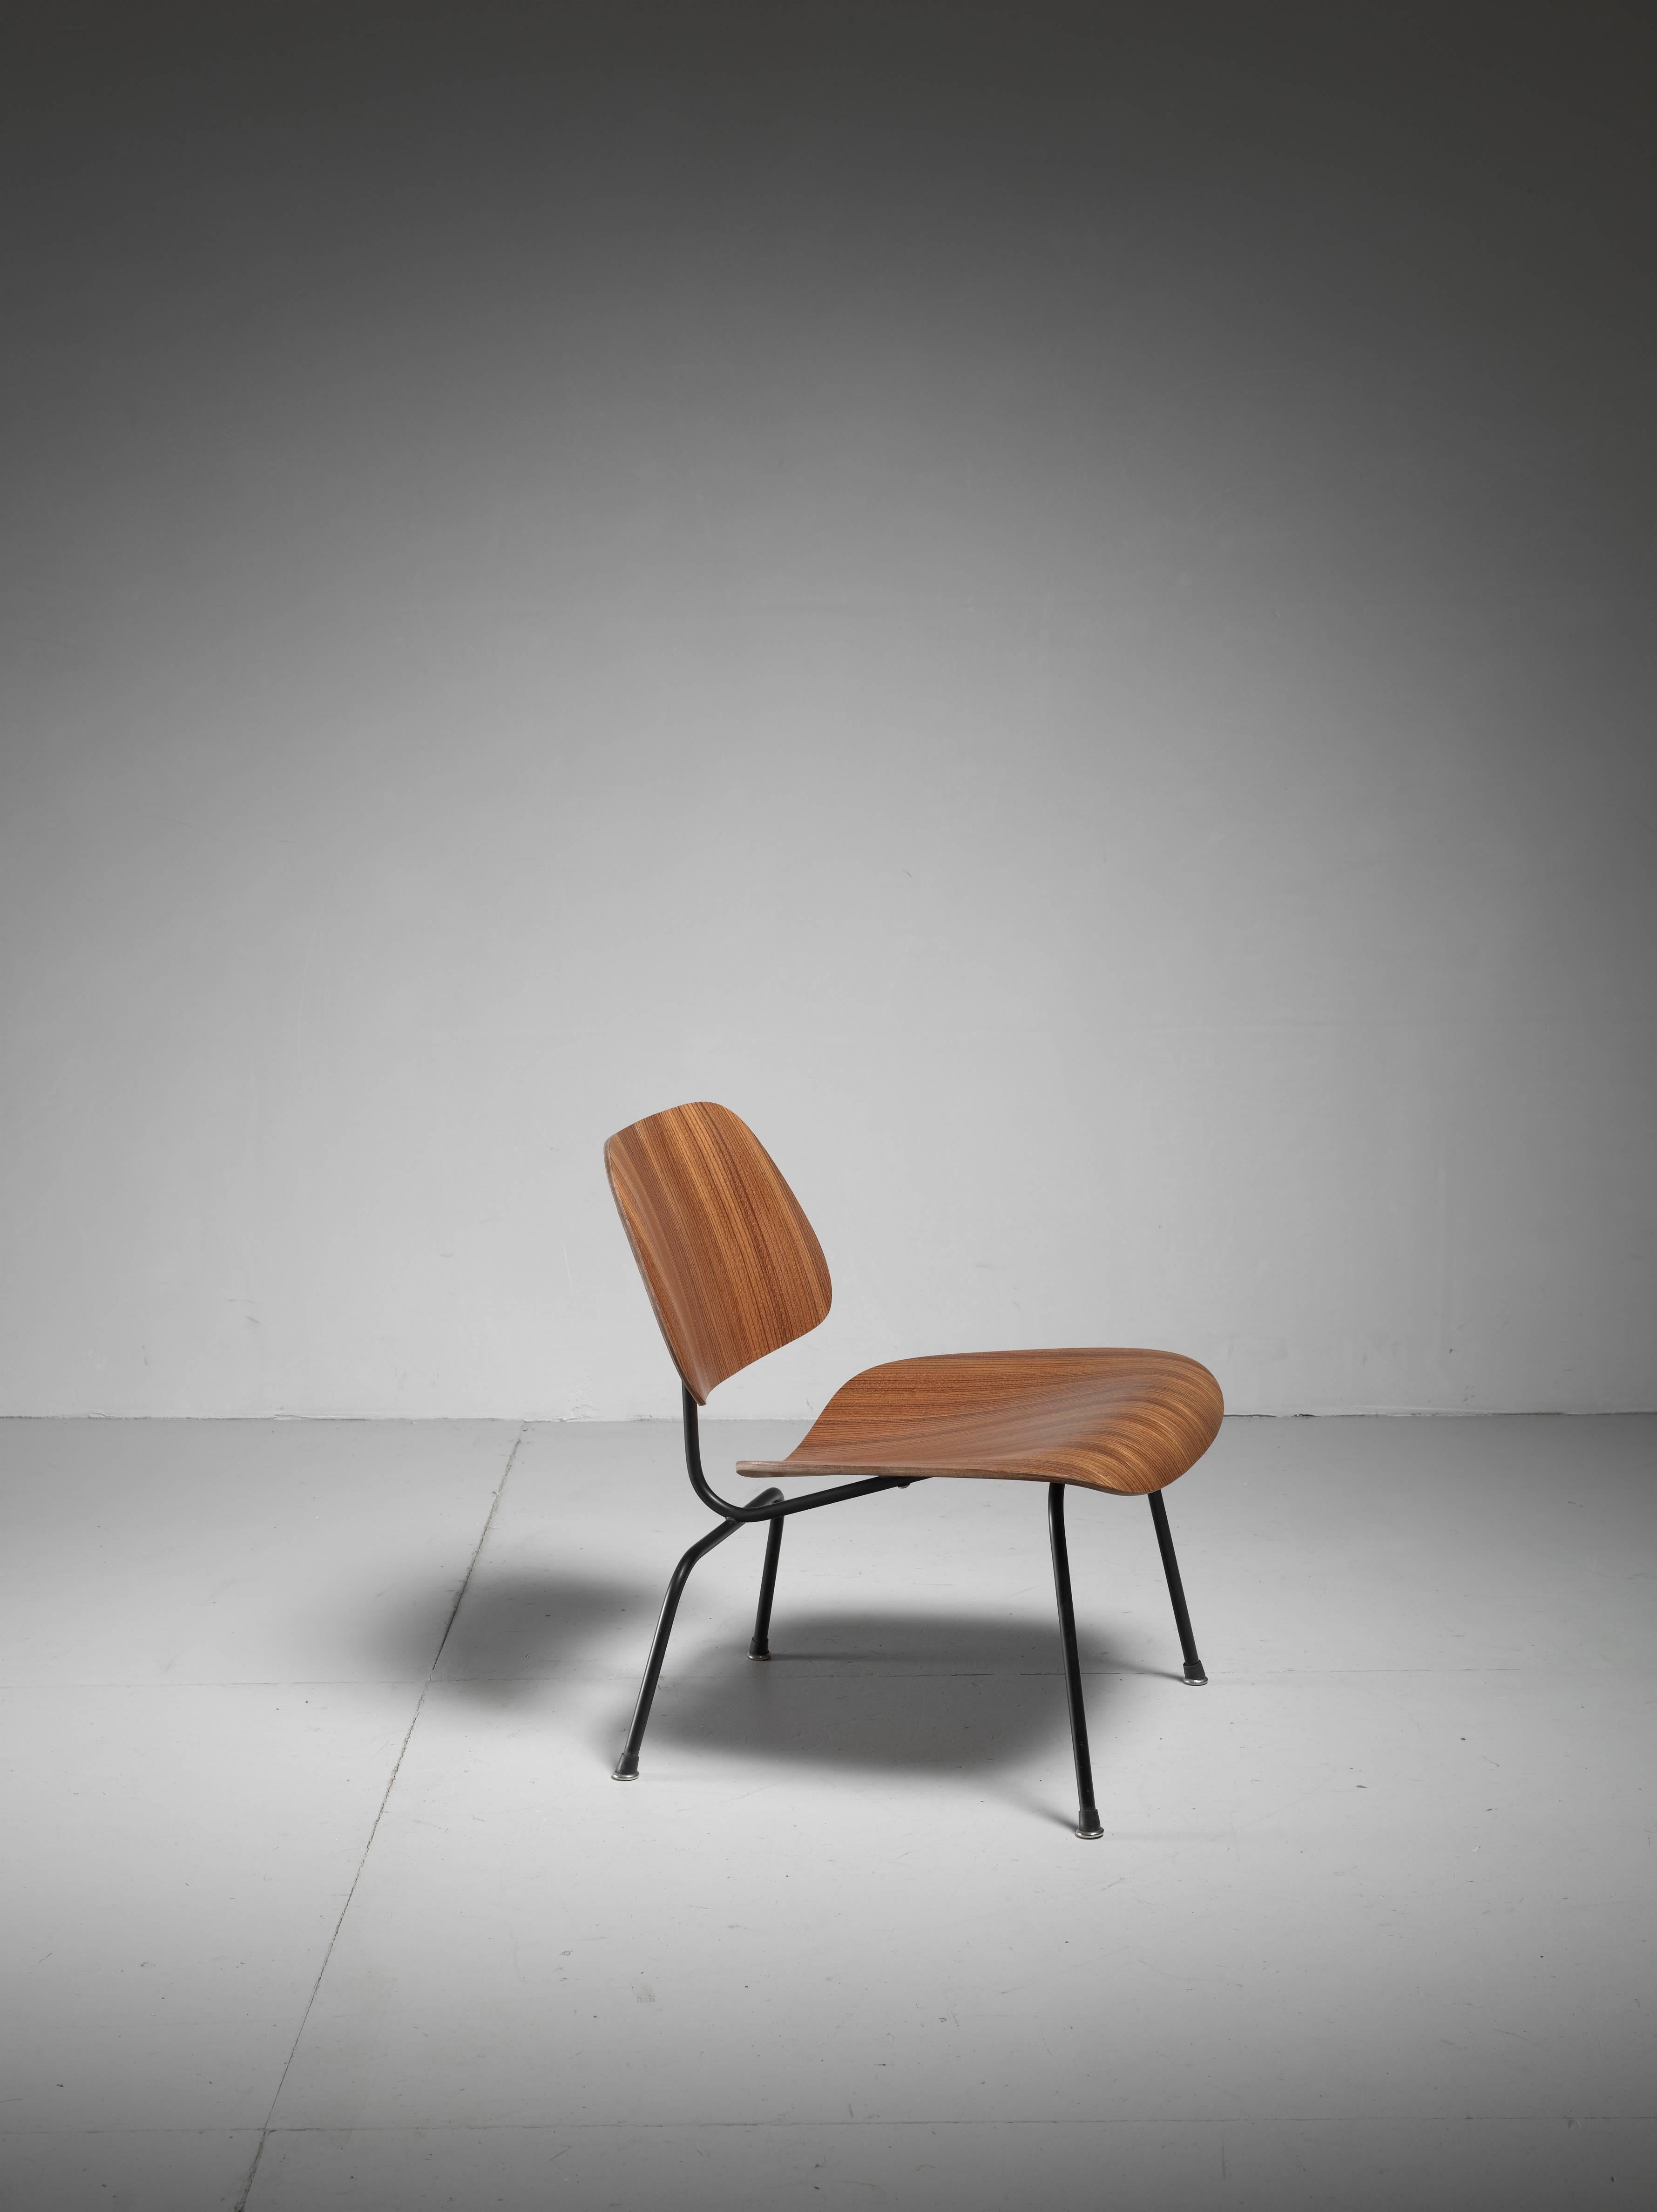 A rare zebrano wood edition of the iconic Charles and Ray LCM chair for Herman Miller in mint condition. The chair is made of a steel frame with a beautifully curved plywood seating and backrest.

Labeled by Herman Miller and in an excellent